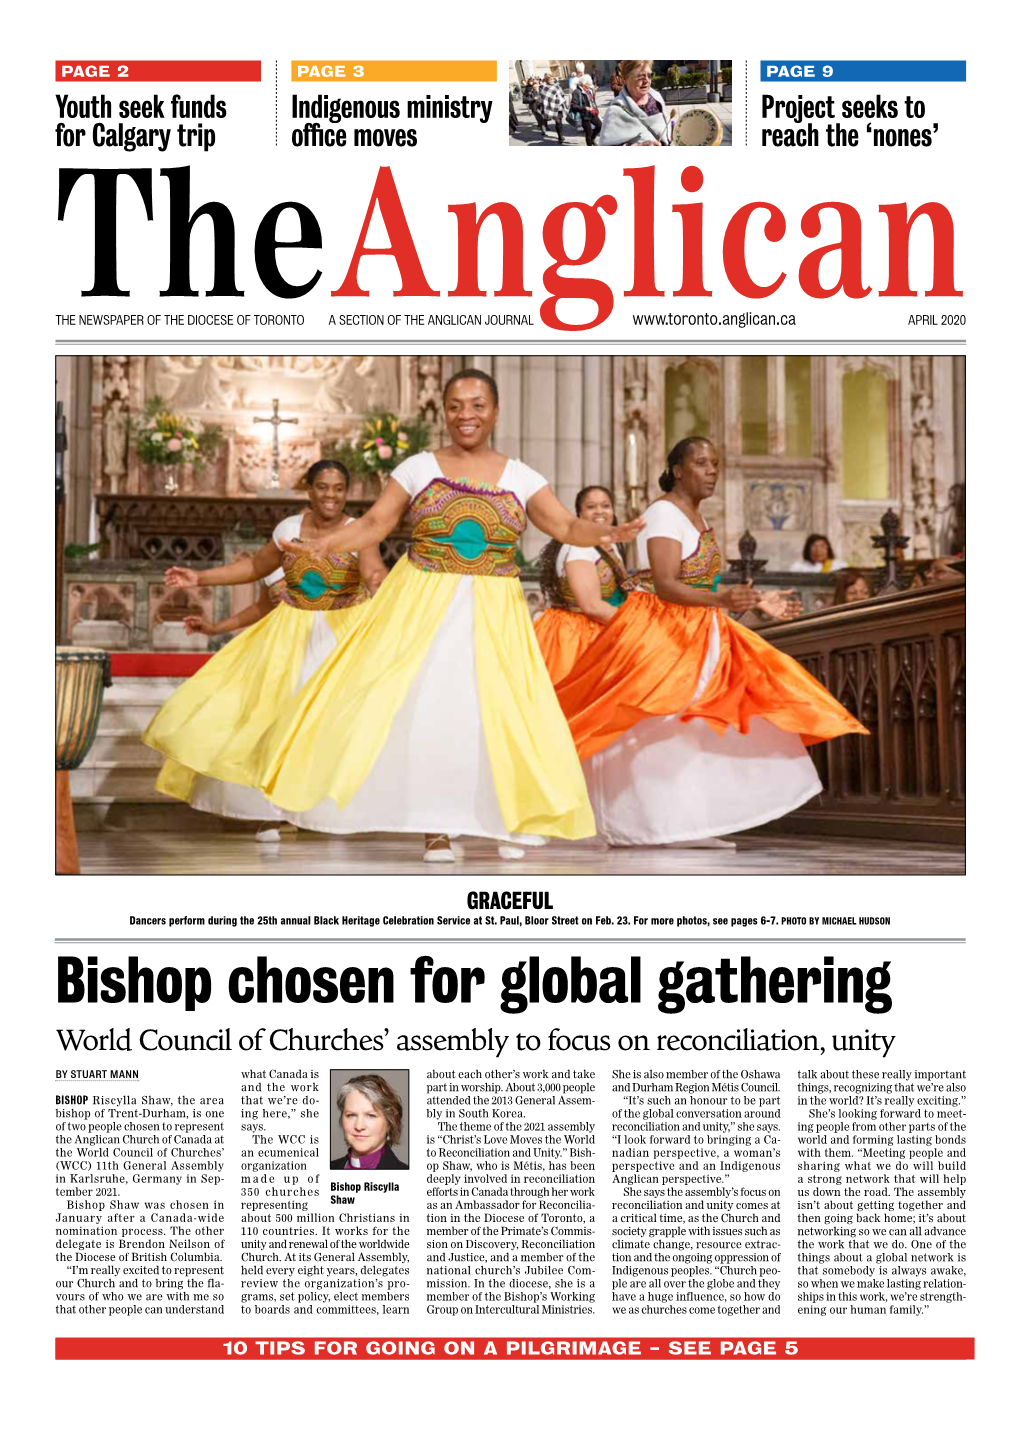 Bishop Chosen for Global Gathering World Council of Churches’ Assembly to Focus on Reconciliation, Unity